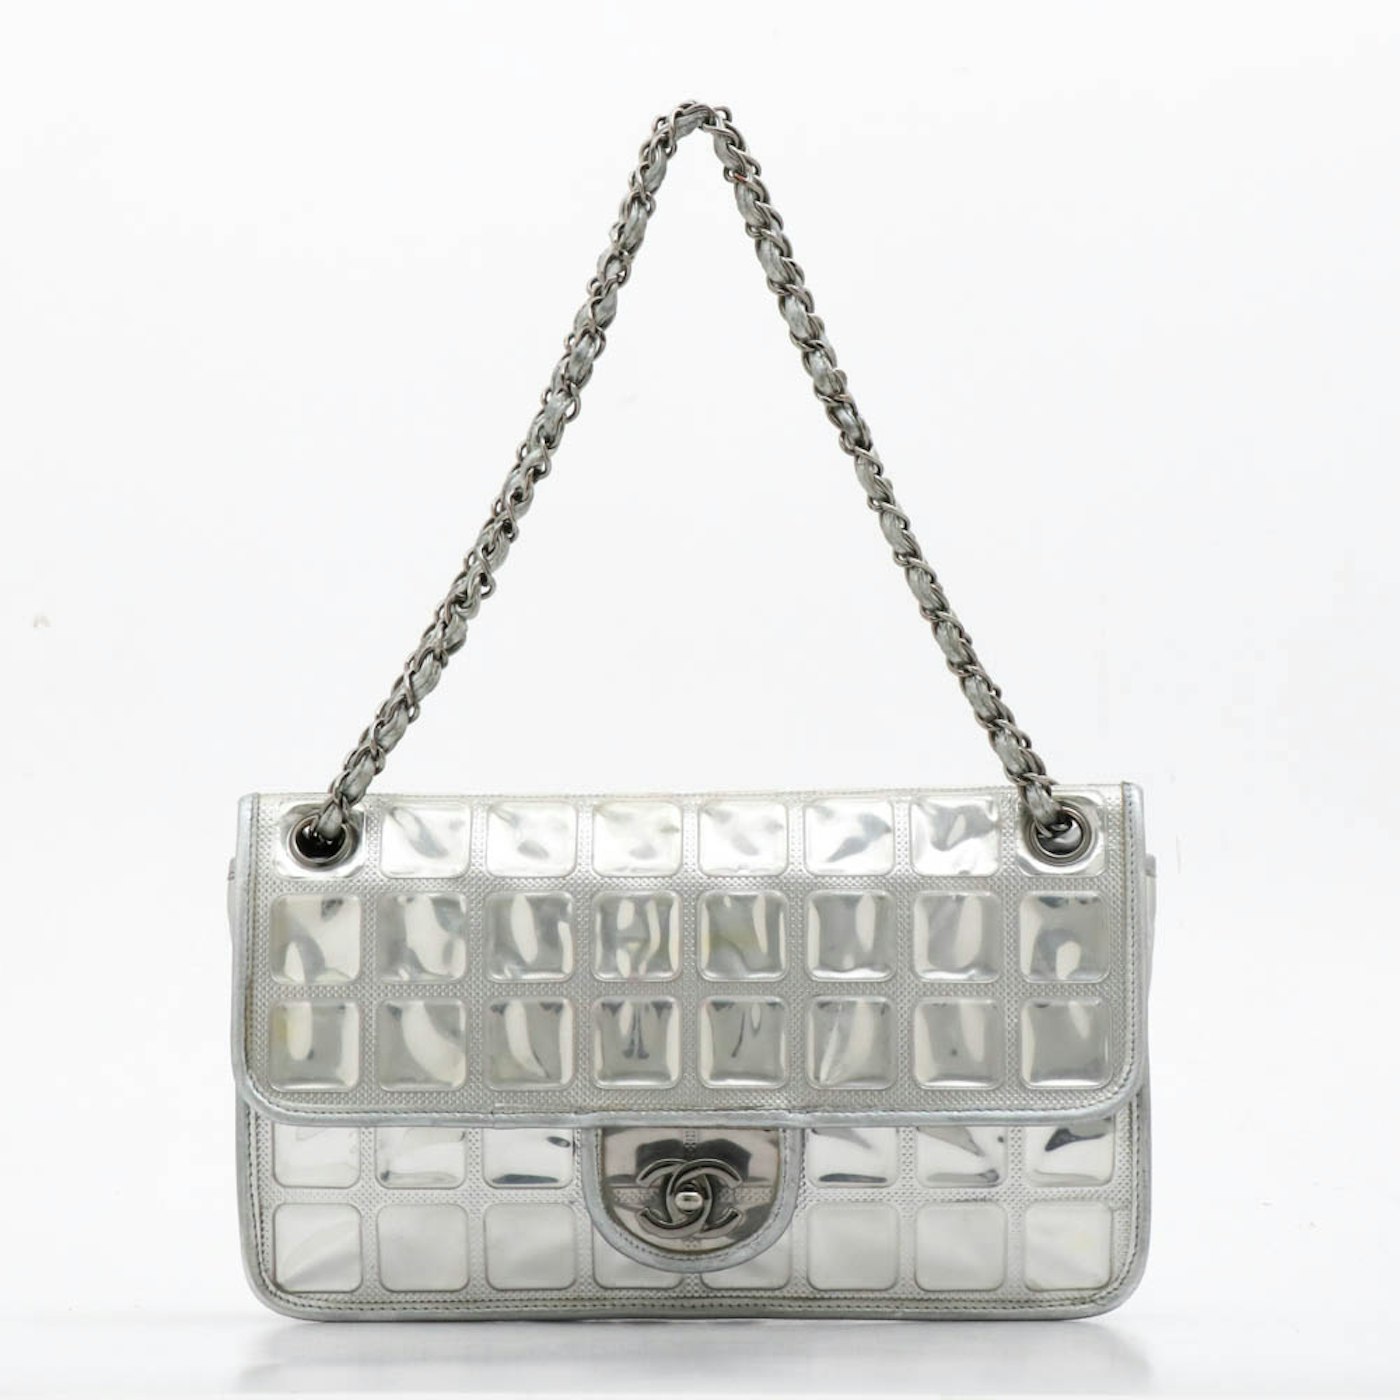 Chanel Ice Cube Patent Leather Flap Bag from Chanel Cruise 2008 ...